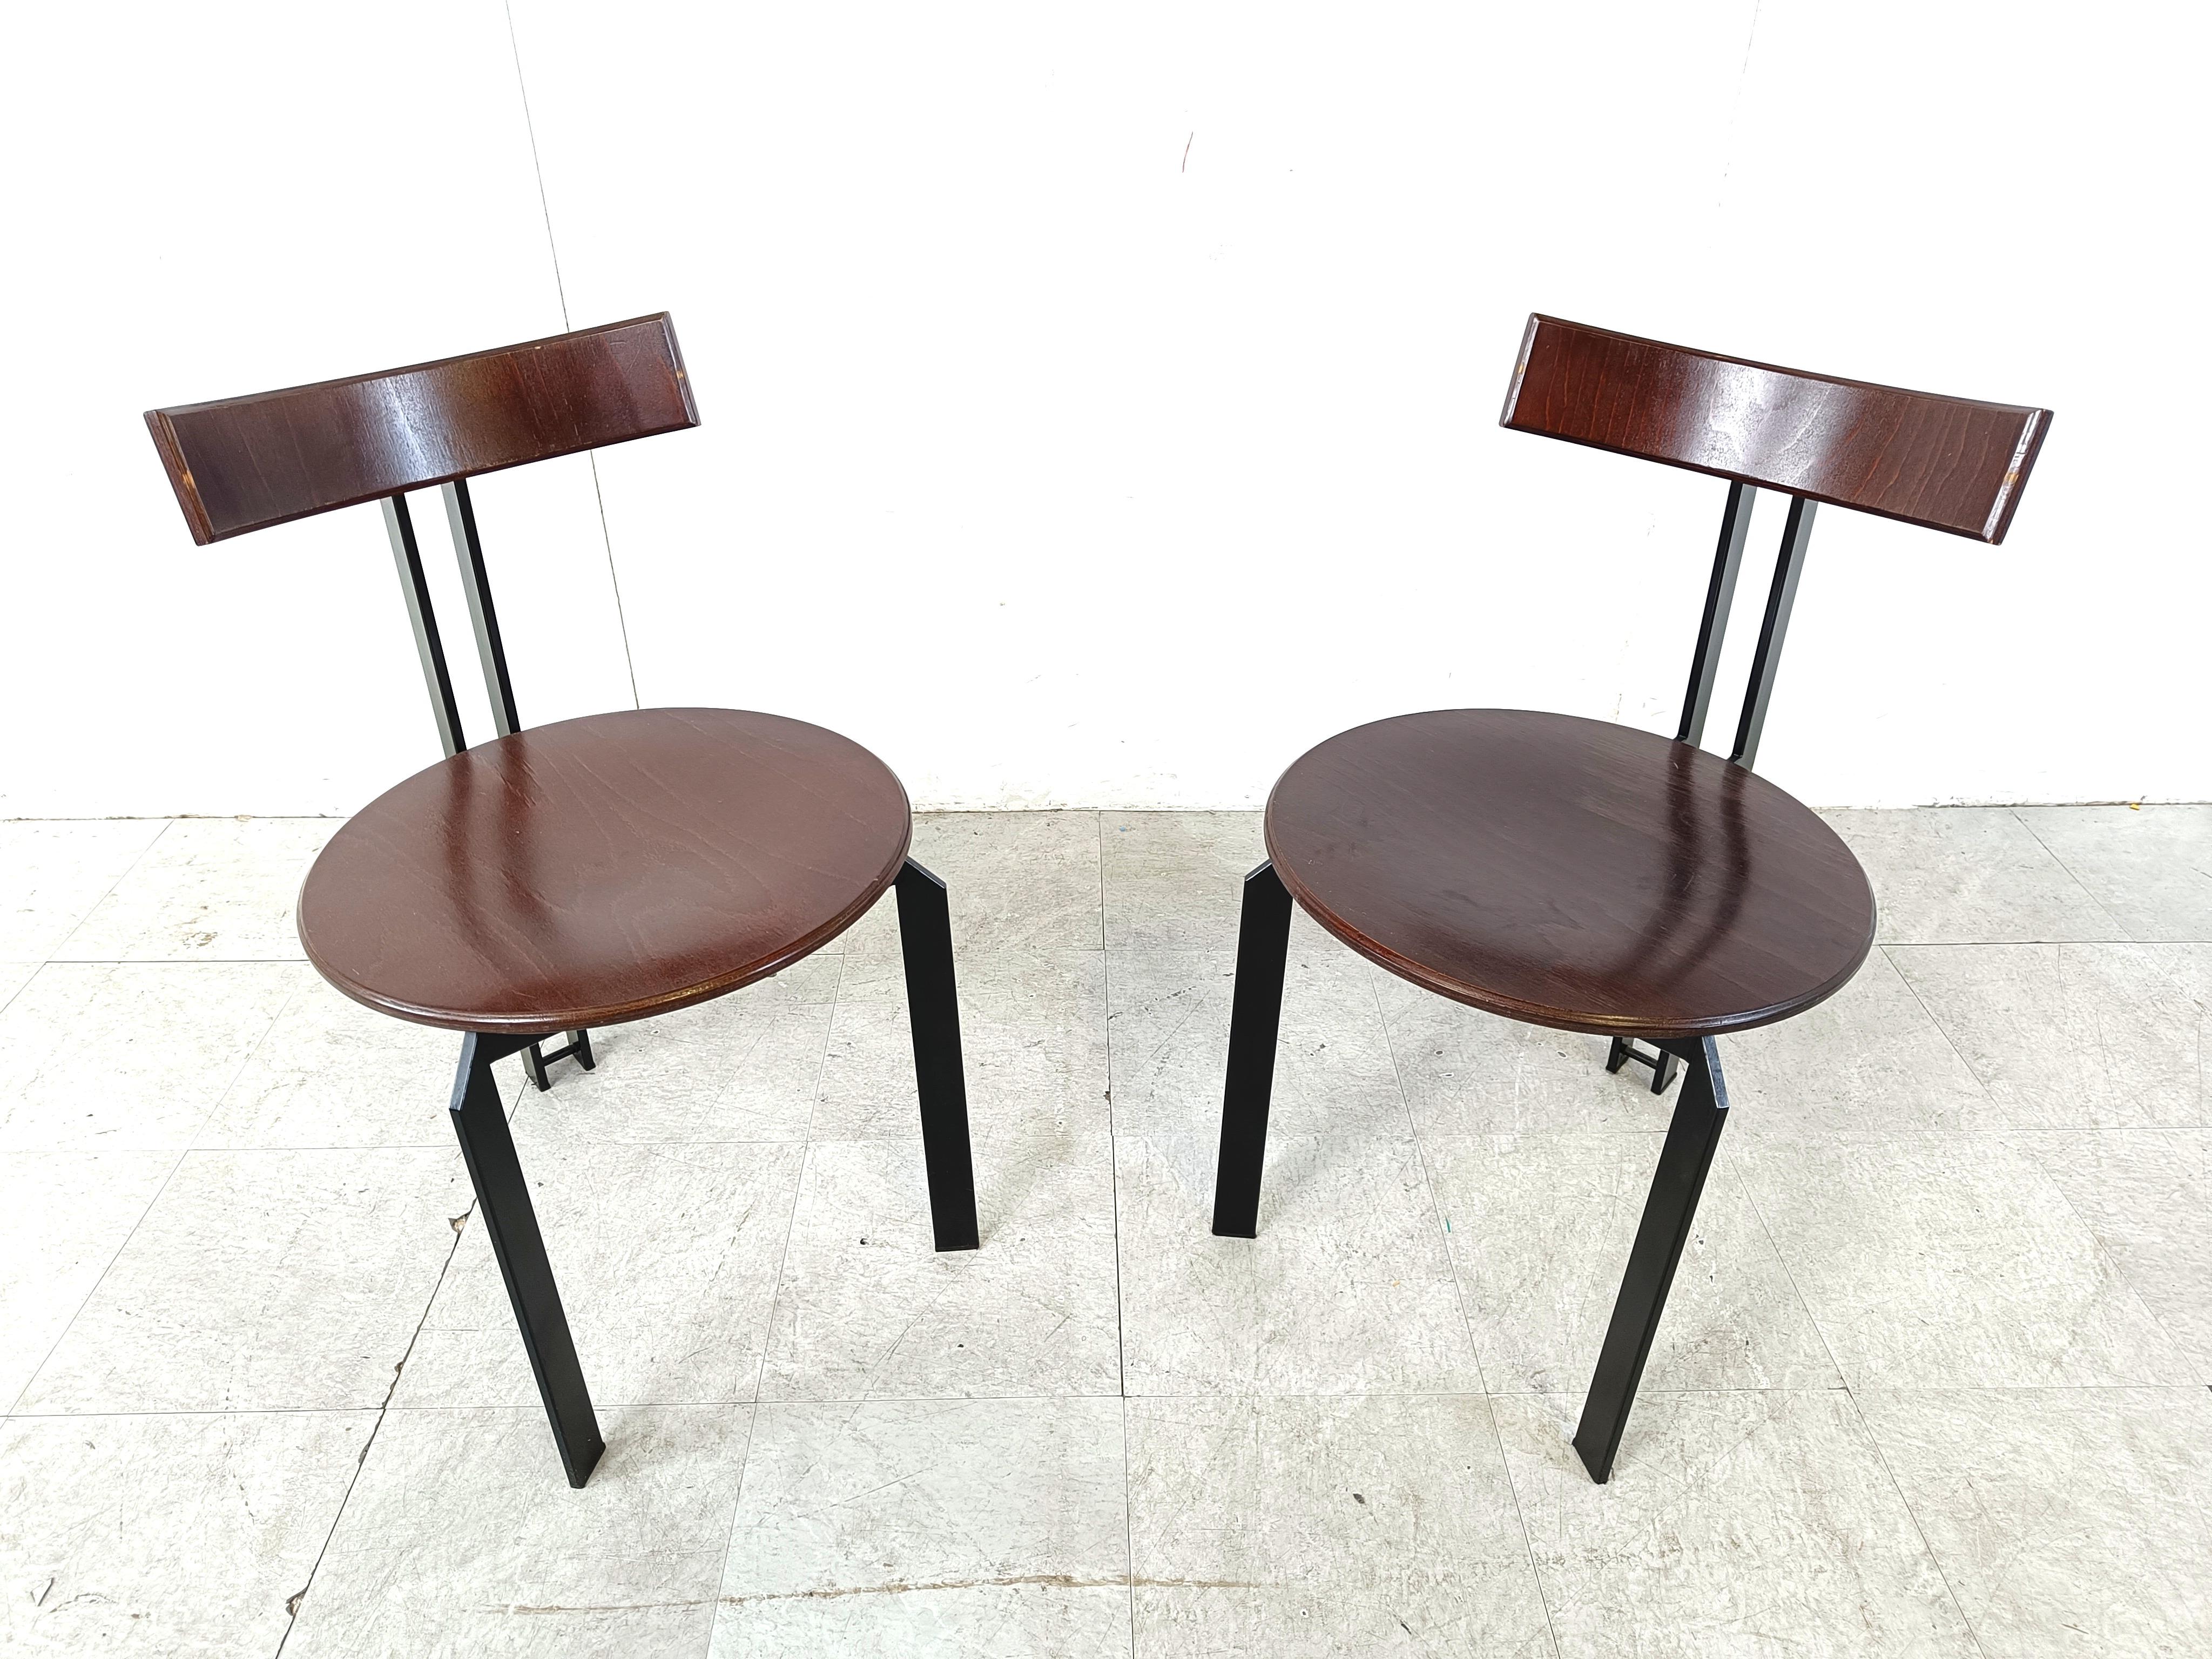 Vintage tripod post modern design dining chairs, model 'Zeta' designed by Martin Haksteen for Harvink.

The chairs have a tripod black lacquered metal frame with wooden szeat and curved backrest.

Beautiful timeless design.

Good condition -